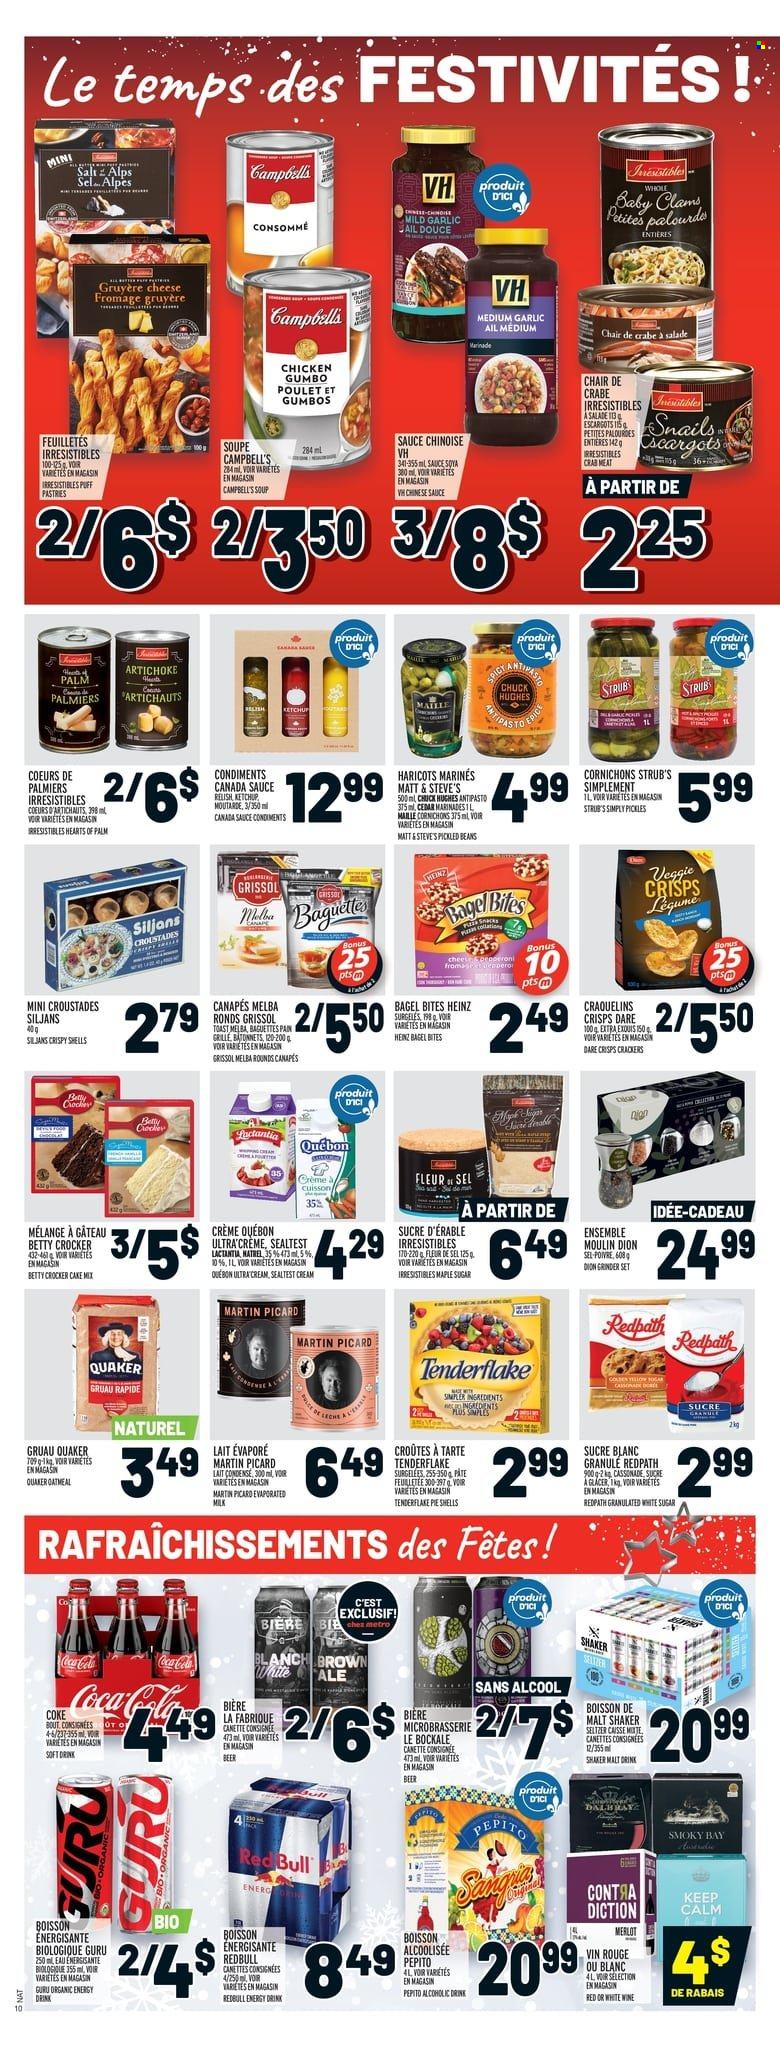 thumbnail - Metro Flyer - December 16, 2021 - December 22, 2021 - Sales products - bagels, pie, cake mix, artichoke, beans, garlic, hearts of palm, clams, crab meat, crab, Campbell's, soup, sauce, Quaker, Gruyere, cheese, evaporated milk, crackers, sugar, oatmeal, malt, Heinz, pickles, Coca-Cola, energy drink, soft drink, Red Bull, seltzer water, Merlot, beer, pan, shaker, baguette, ketchup. Page 15.